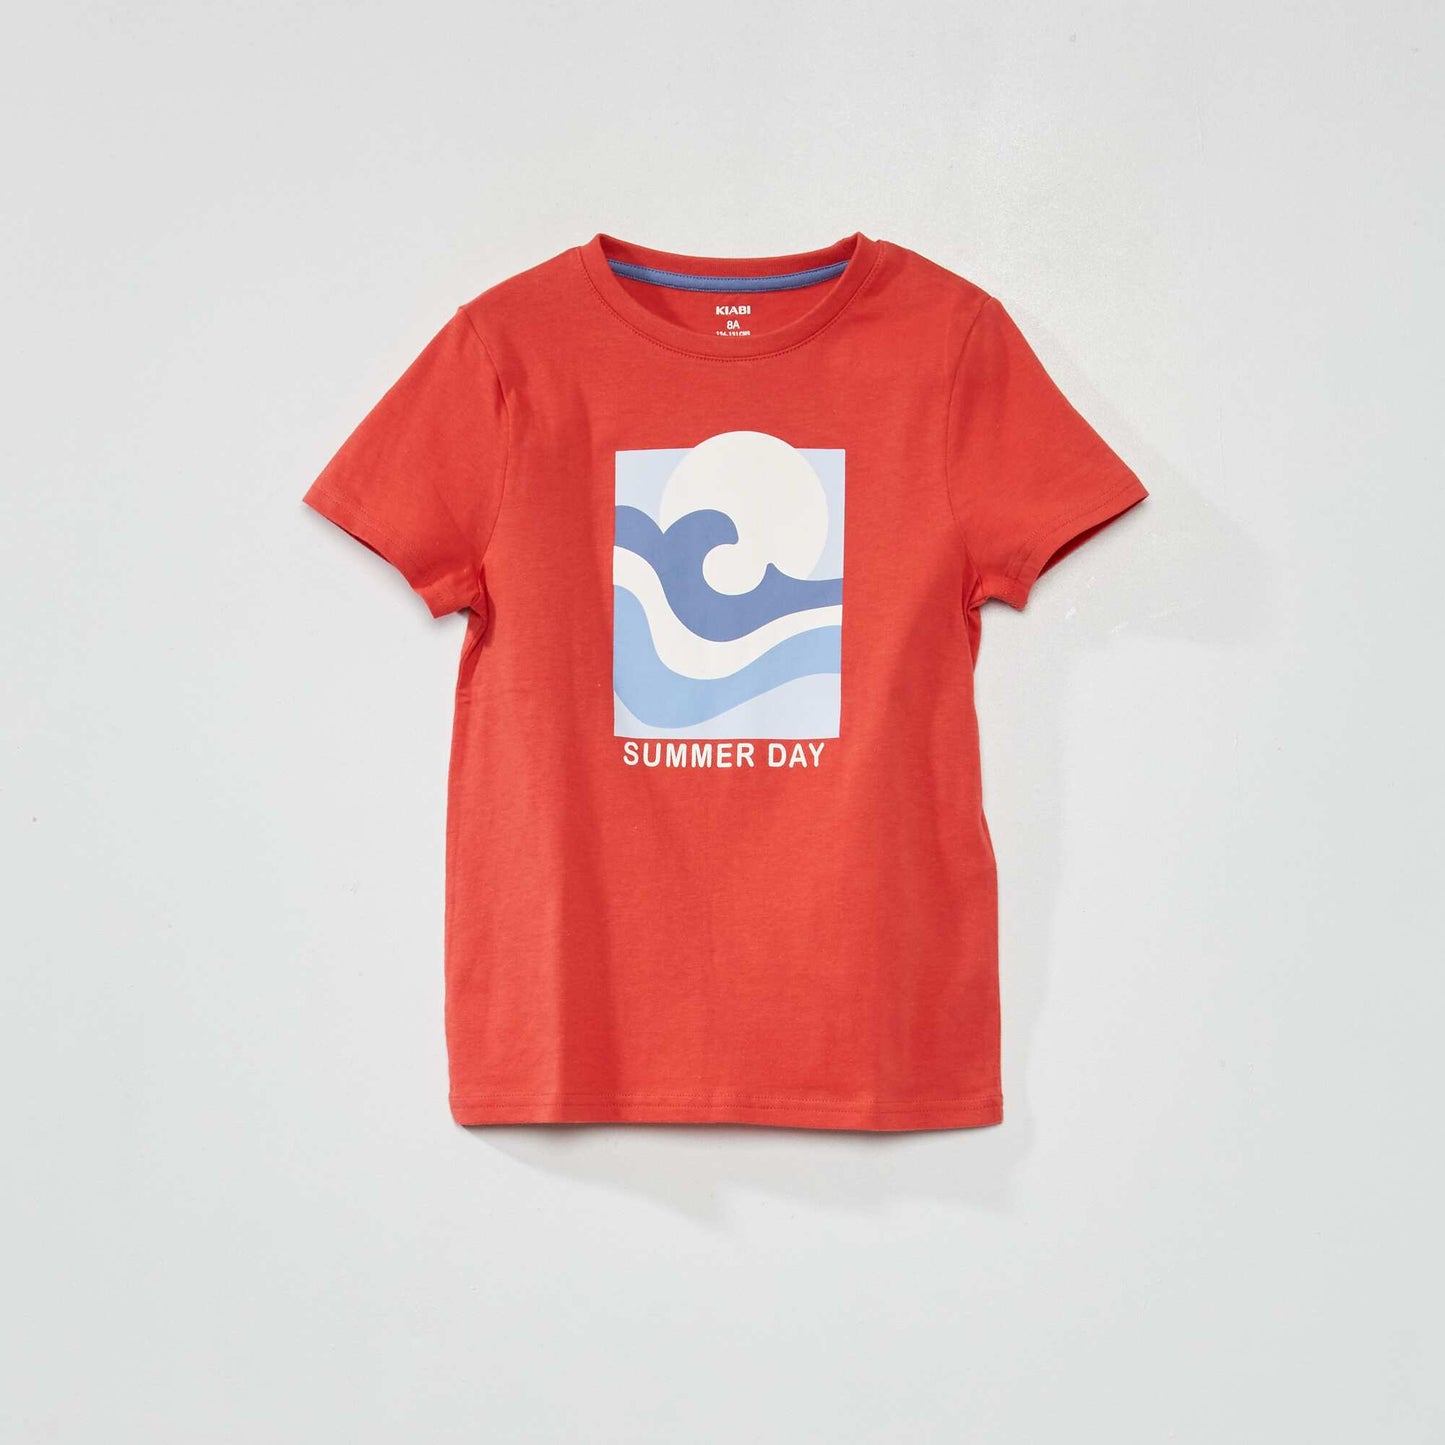 'Summer day' T-shirt RED